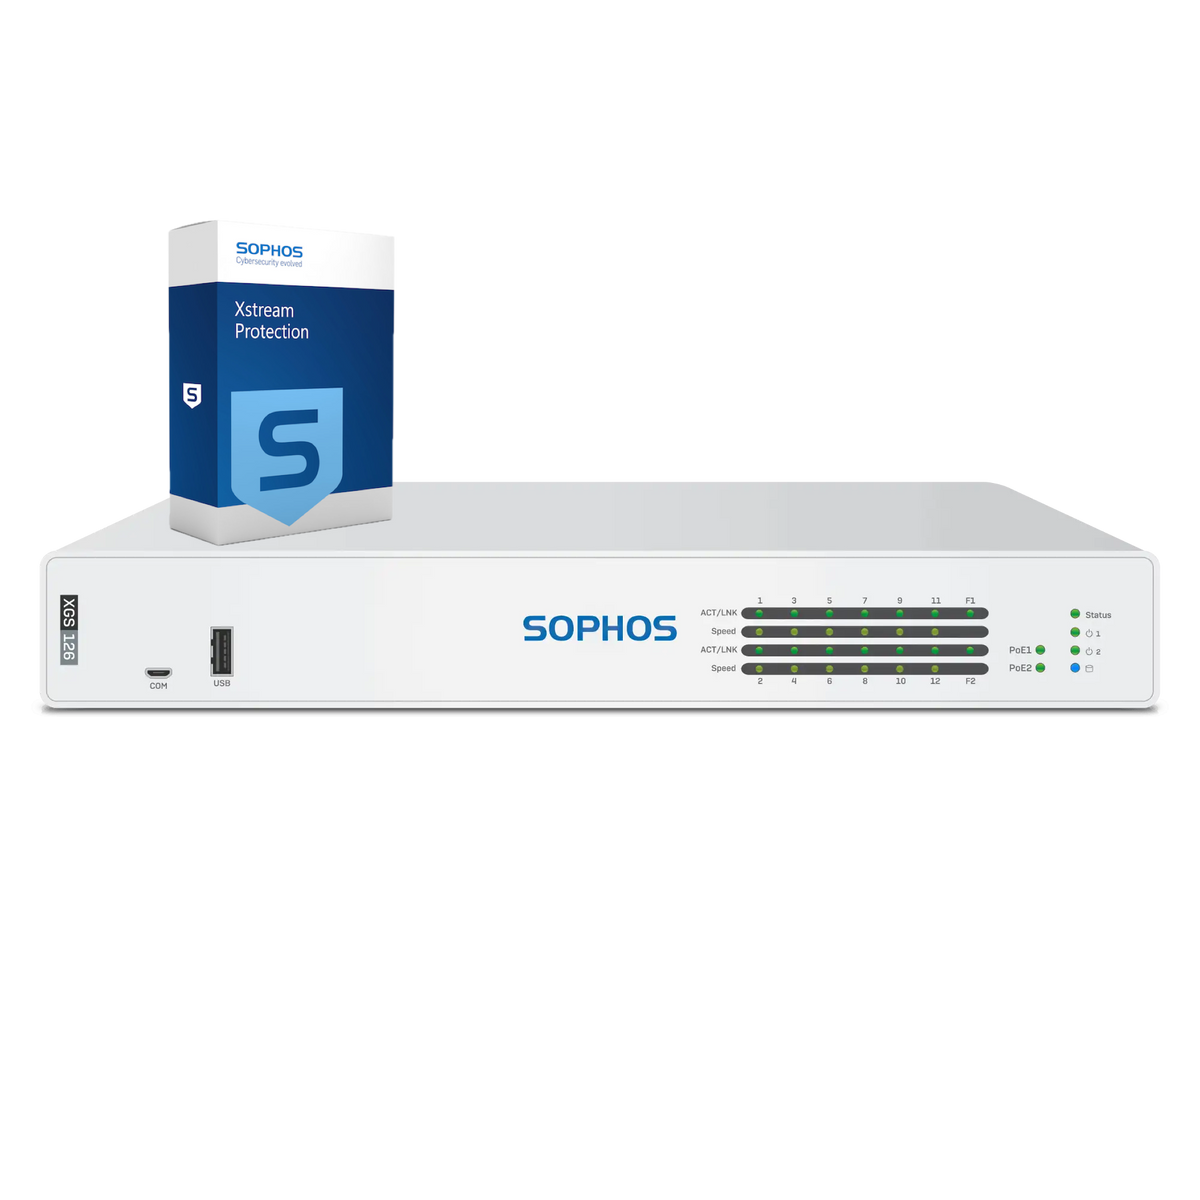 Sophos XGS 126 Firewall with Xstream Protection, 3-year - EU power cord